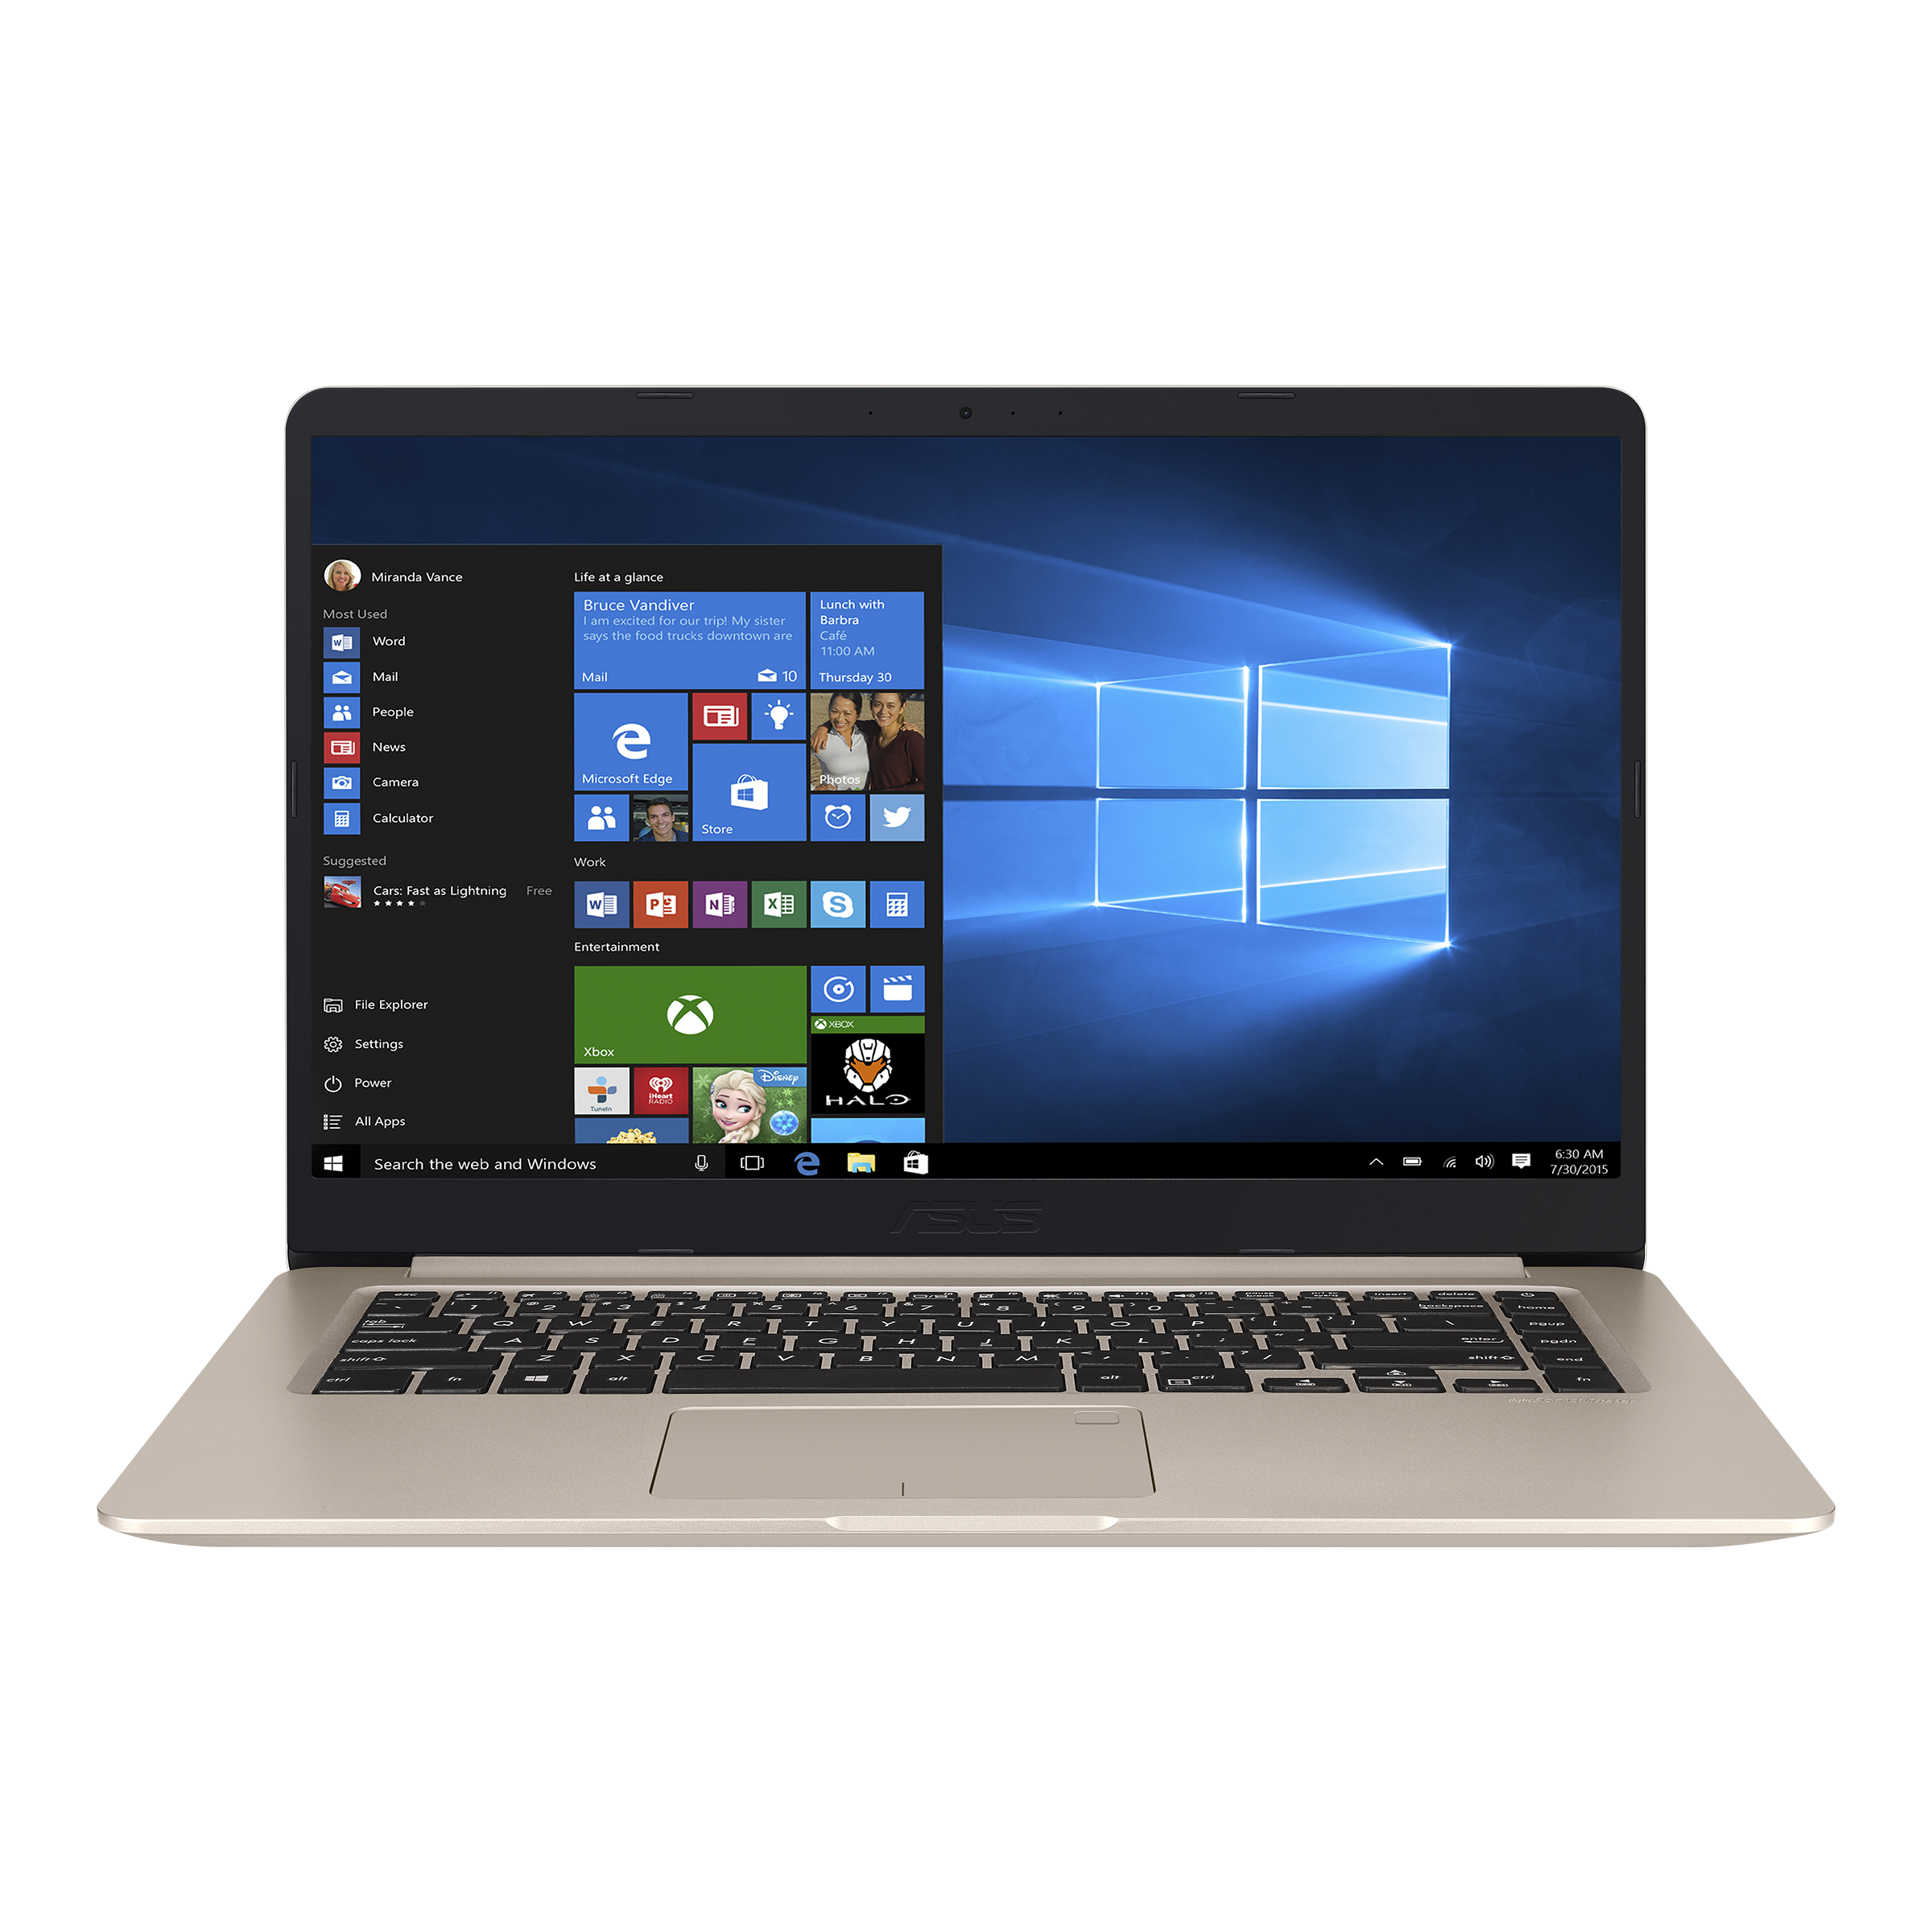 ASUS Vivobook S15 S510｜Laptops For Students｜ASUS Canada